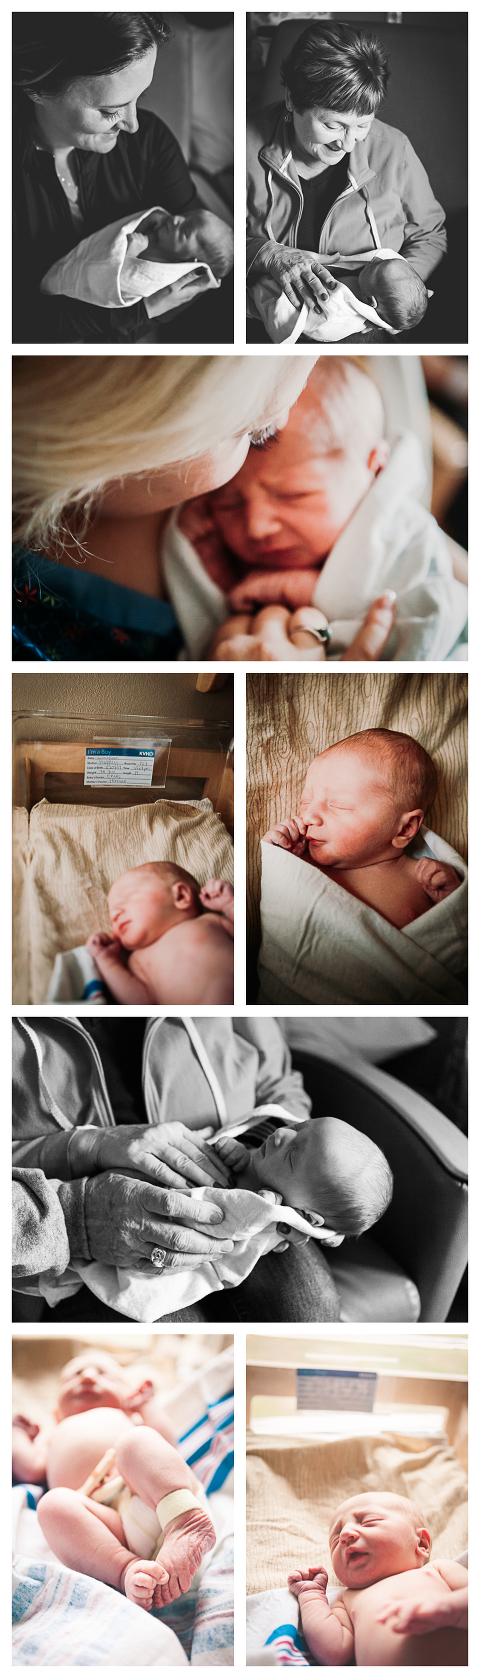 Baby Cayson, lifestyle newborn session at the hospital by Hailey Haberman Photography in Ellensburg WA 